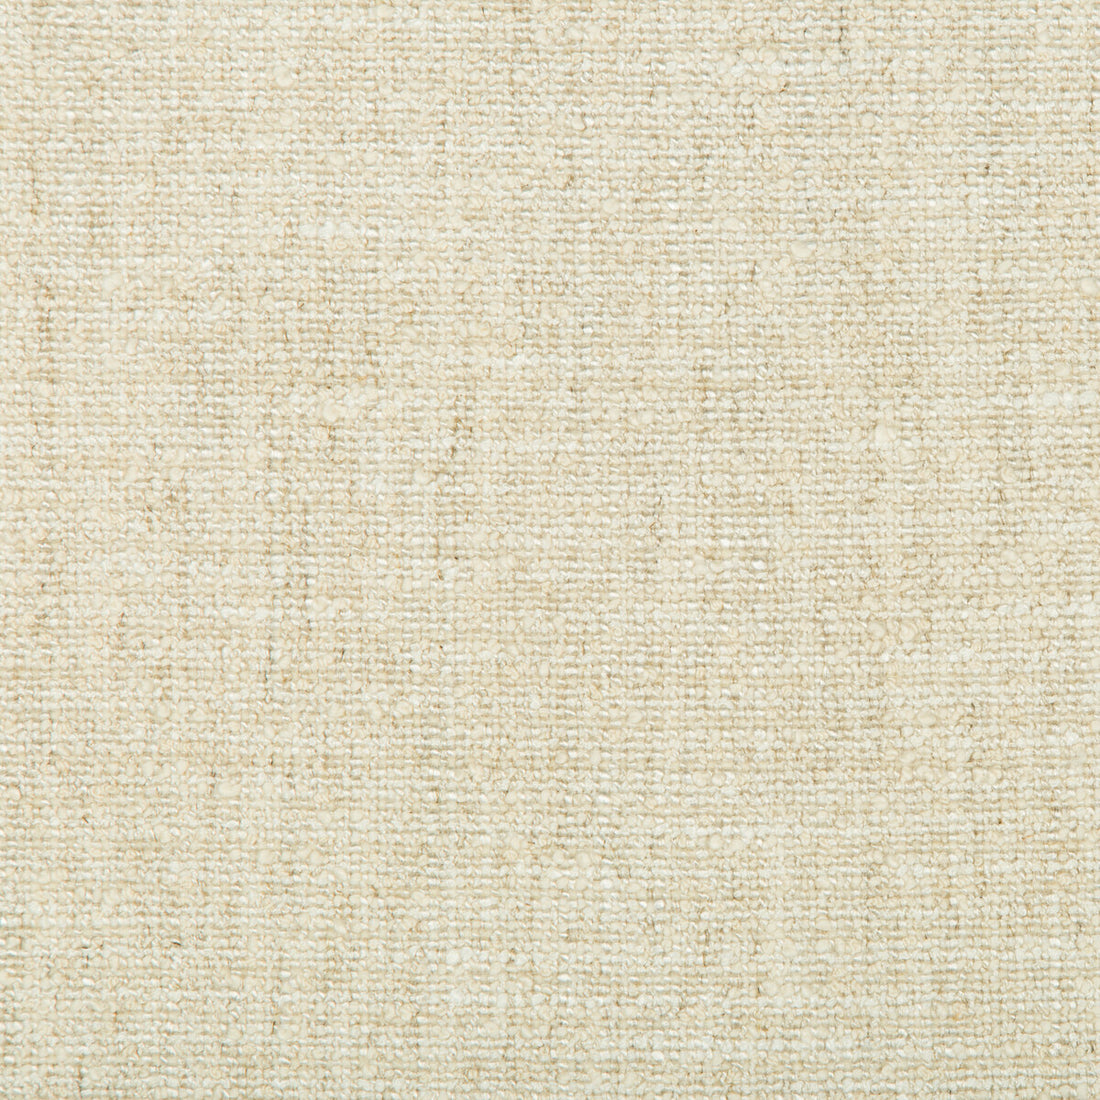 Fine Boucle fabric in beige color - pattern BF10964.230.0 - by G P &amp; J Baker in the Westport collection